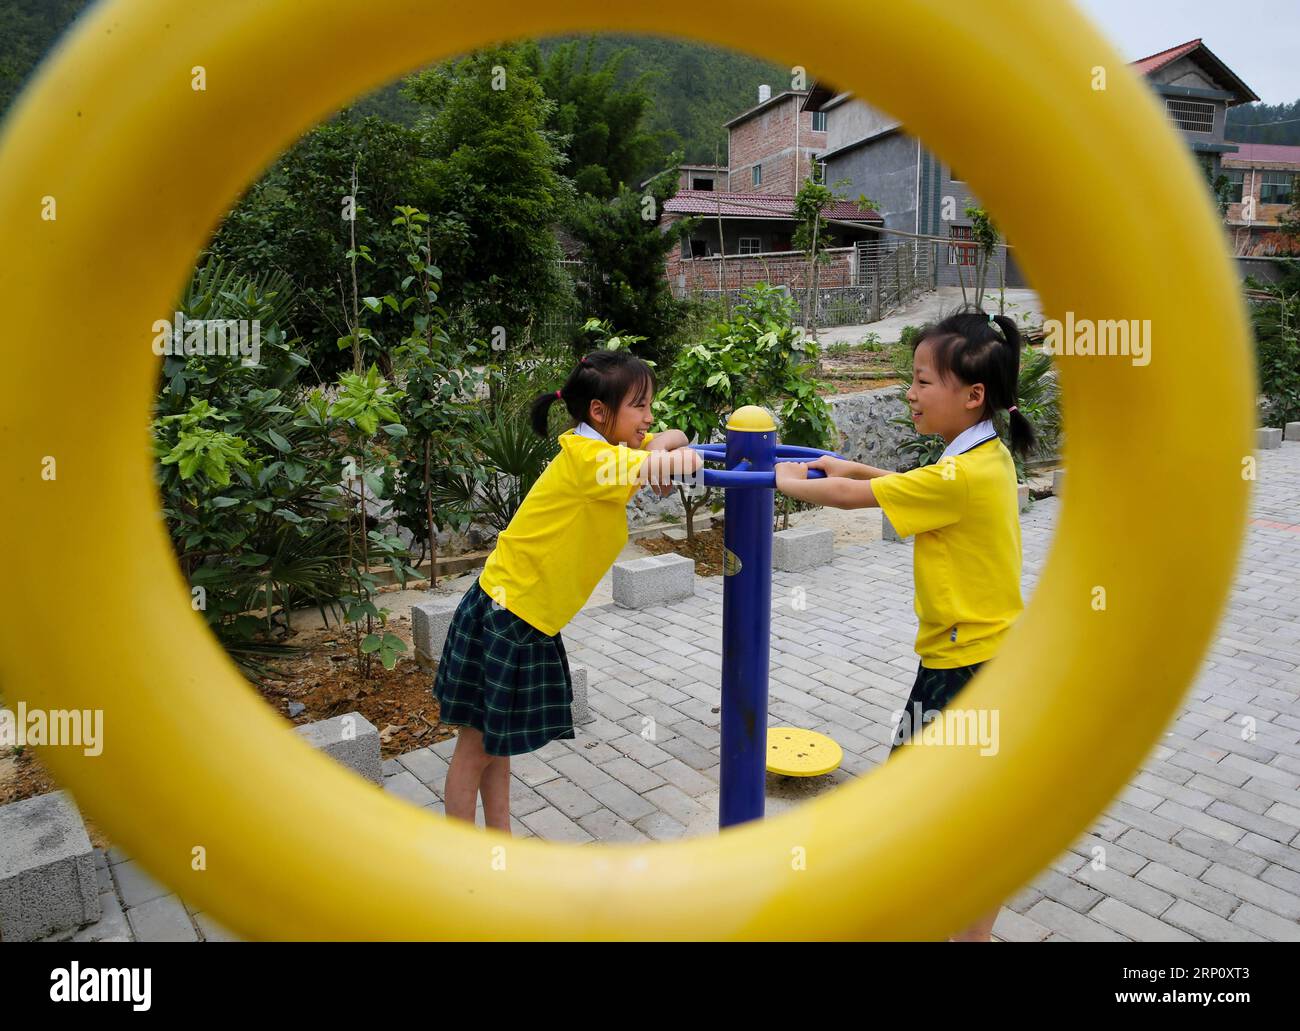 (180529) -- NANCHANG, May 29, 2018 -- Eleven-year-old Zhong Xiaofang (L) and her twin sister Zhong Xiaolan play with an outdoor fitness gear in Suolong Village of Yudu County, east China s Jiangxi Province, May 23, 2018. With about 1,000 residents, Suolong Village has 29 cases of multiple births, a high rate considering the modest population size. ) (lmm) CHINA-JIANGXI-VILLAGE-MULTIPLE BIRTHS-TWINS-LIFE (CN) PanxSiwei PUBLICATIONxNOTxINxCHN Stock Photo